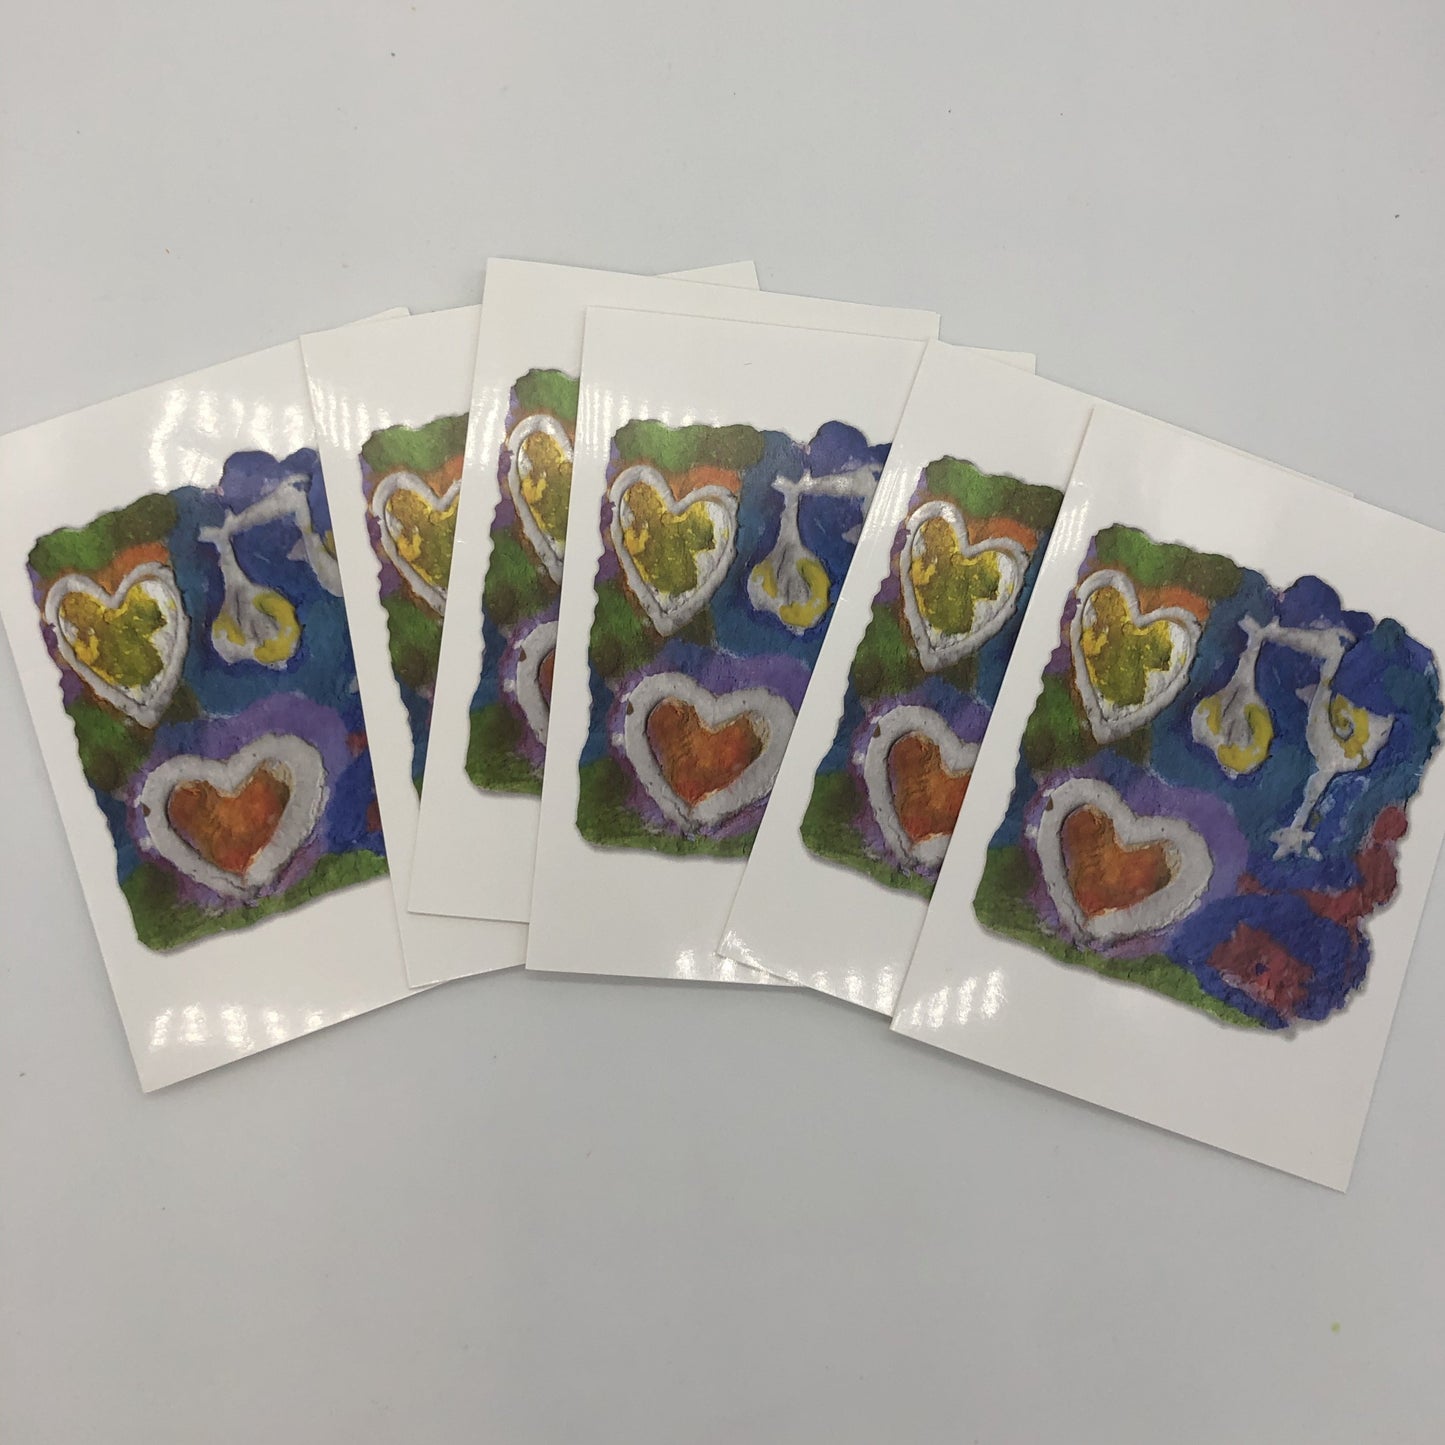 Six cards fanned out. Printed card of photo of handmade paper in blues, greens and reds.  On top of the design are two white hearts and a stork holding a wrapped baby by it's beak.